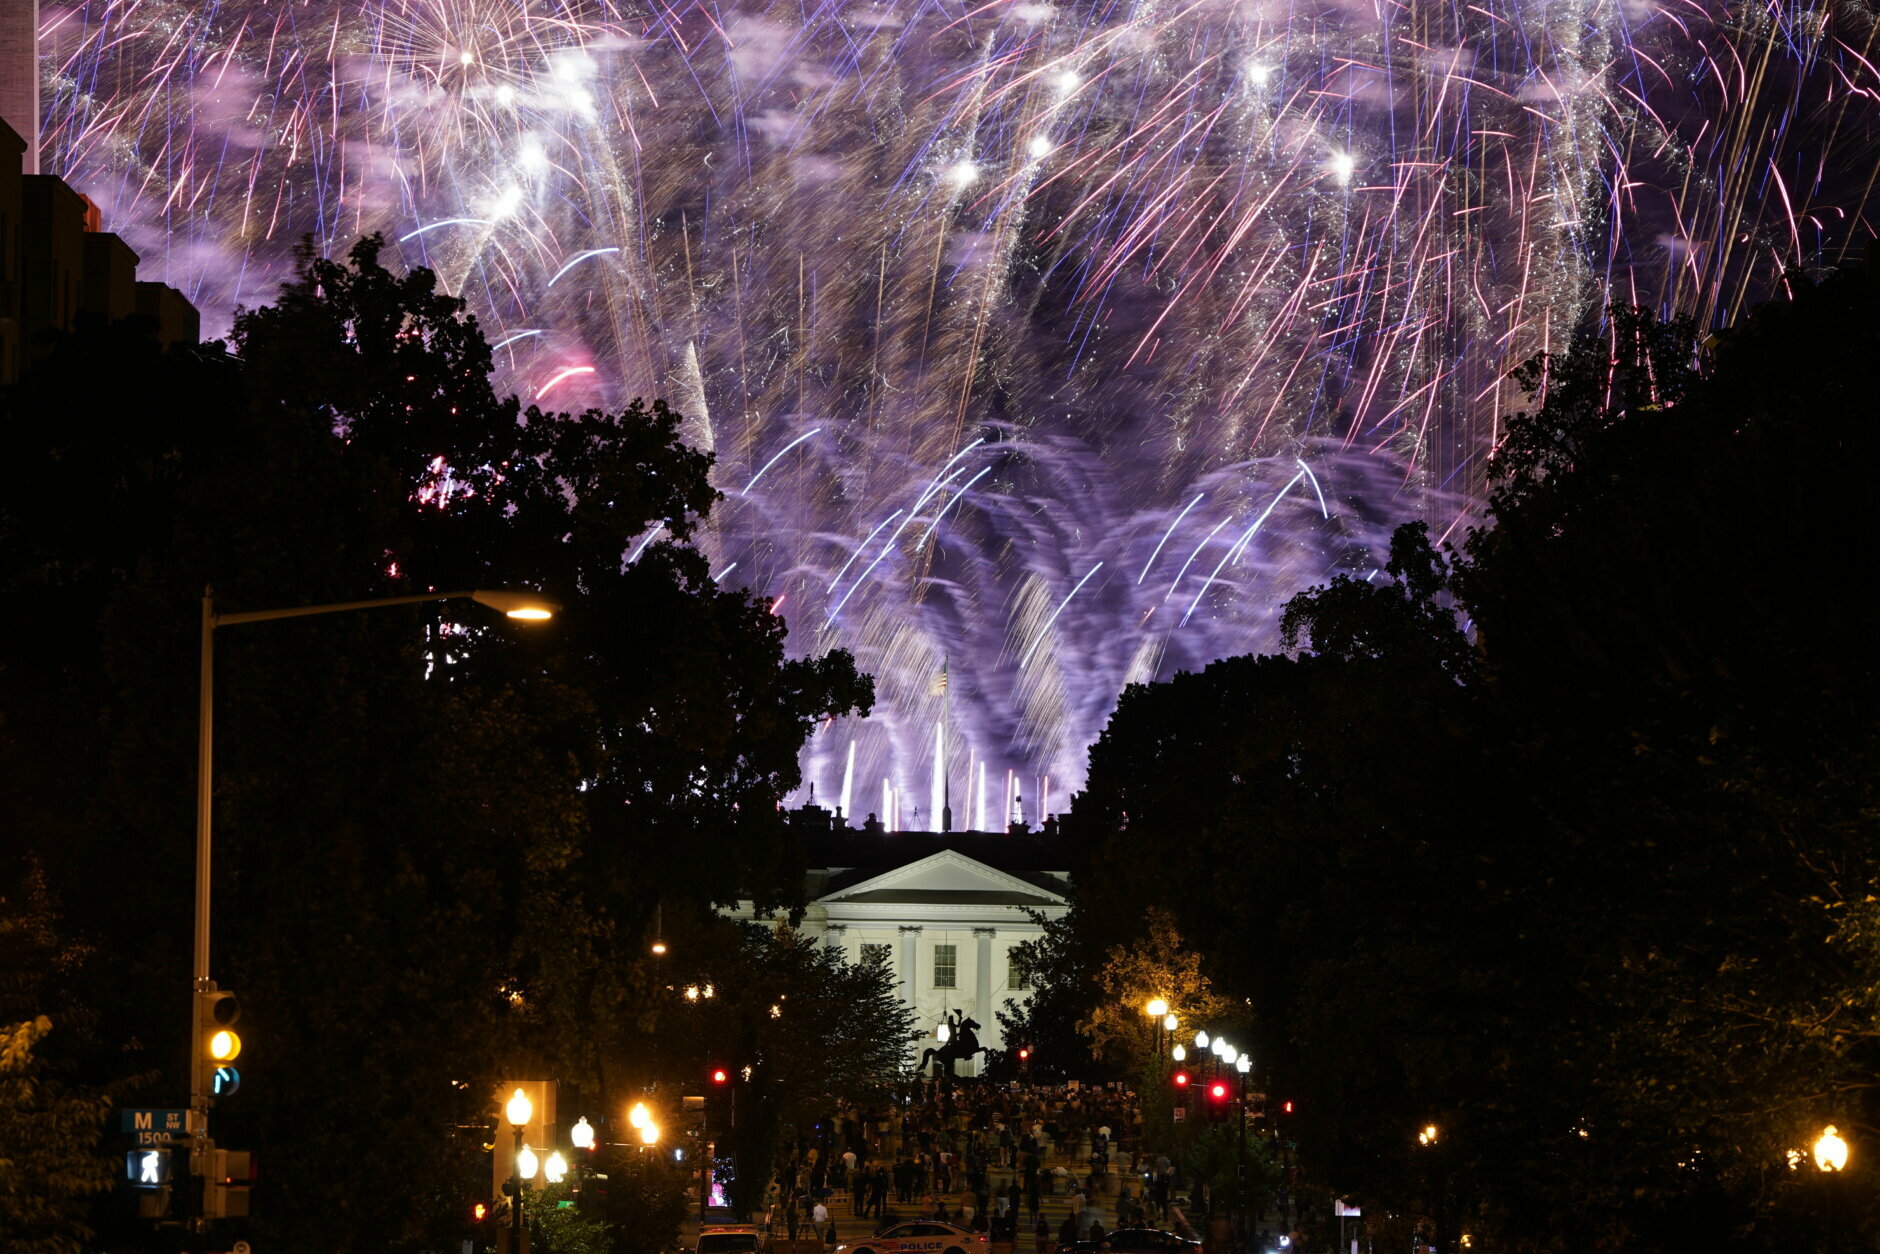 Fireworks light up the sky over Washington after President Donald Trump delivered his acceptance speech at the White House to the 2020 Republican National Convention, Thursday, Aug. 27, 2020. (AP Photo/J. Scott Applewhite)